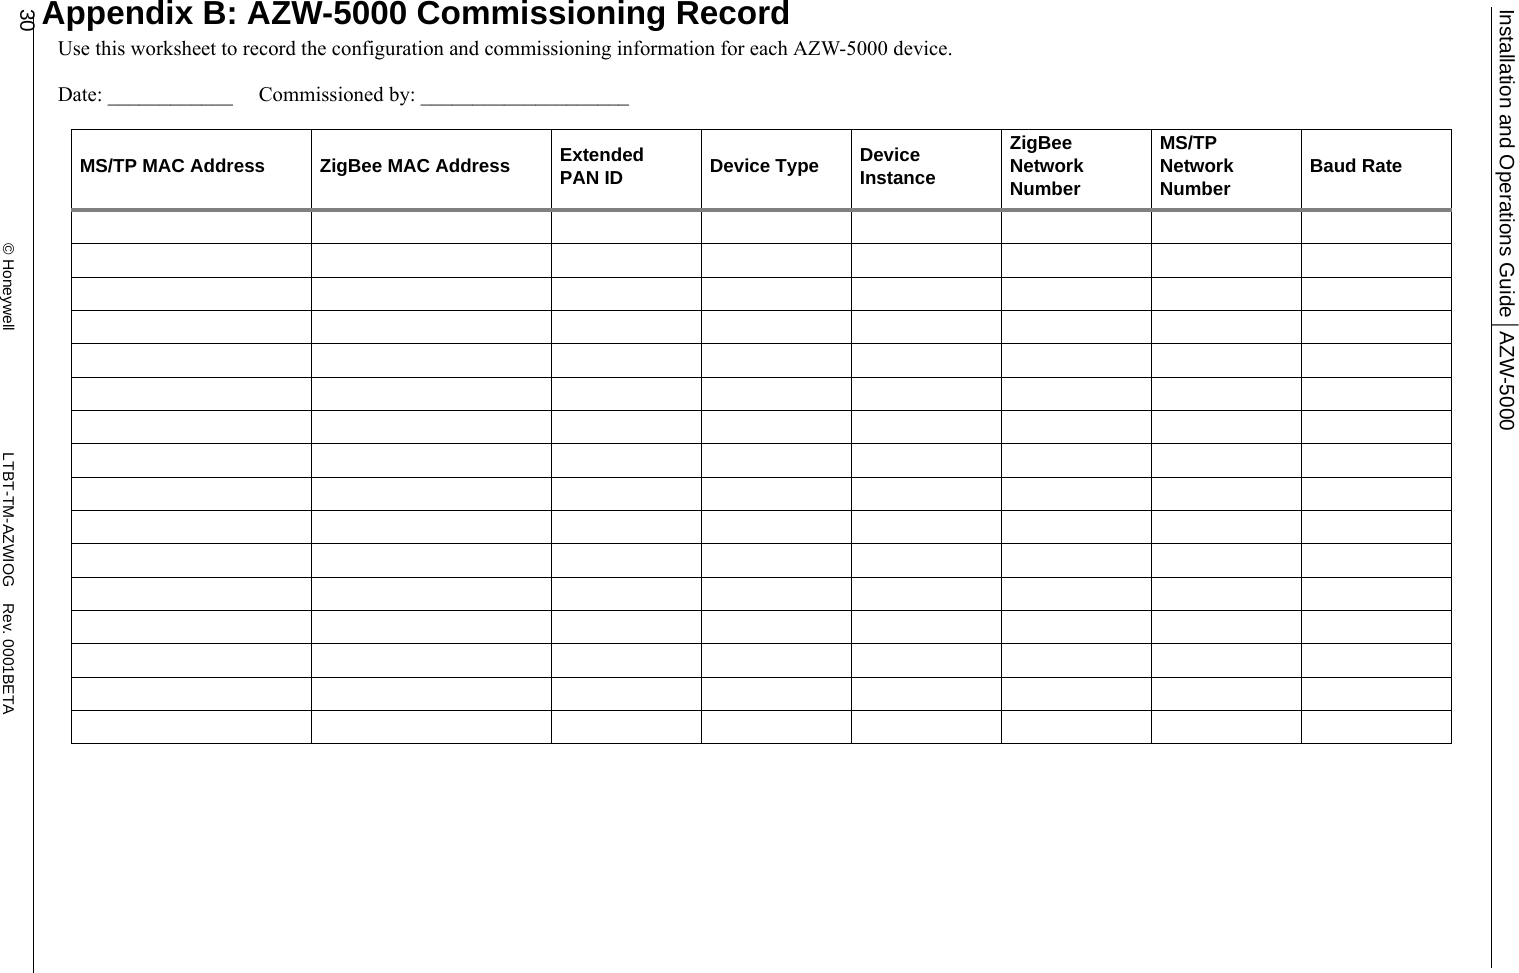 Installation and Operations Guide | AZW-500030                                                      © Honeywell                            LTBT-TM-AZWIOG Rev. 0001BETAAppendix B: AZW-5000 Commissioning RecordUse this worksheet to record the configuration and commissioning information for each AZW-5000 device.Date: ____________     Commissioned by: ____________________MS/TP MAC Address ZigBee MAC Address Extended PAN ID Device Type Device InstanceZigBee Network NumberMS/TP Network Number Baud Rate